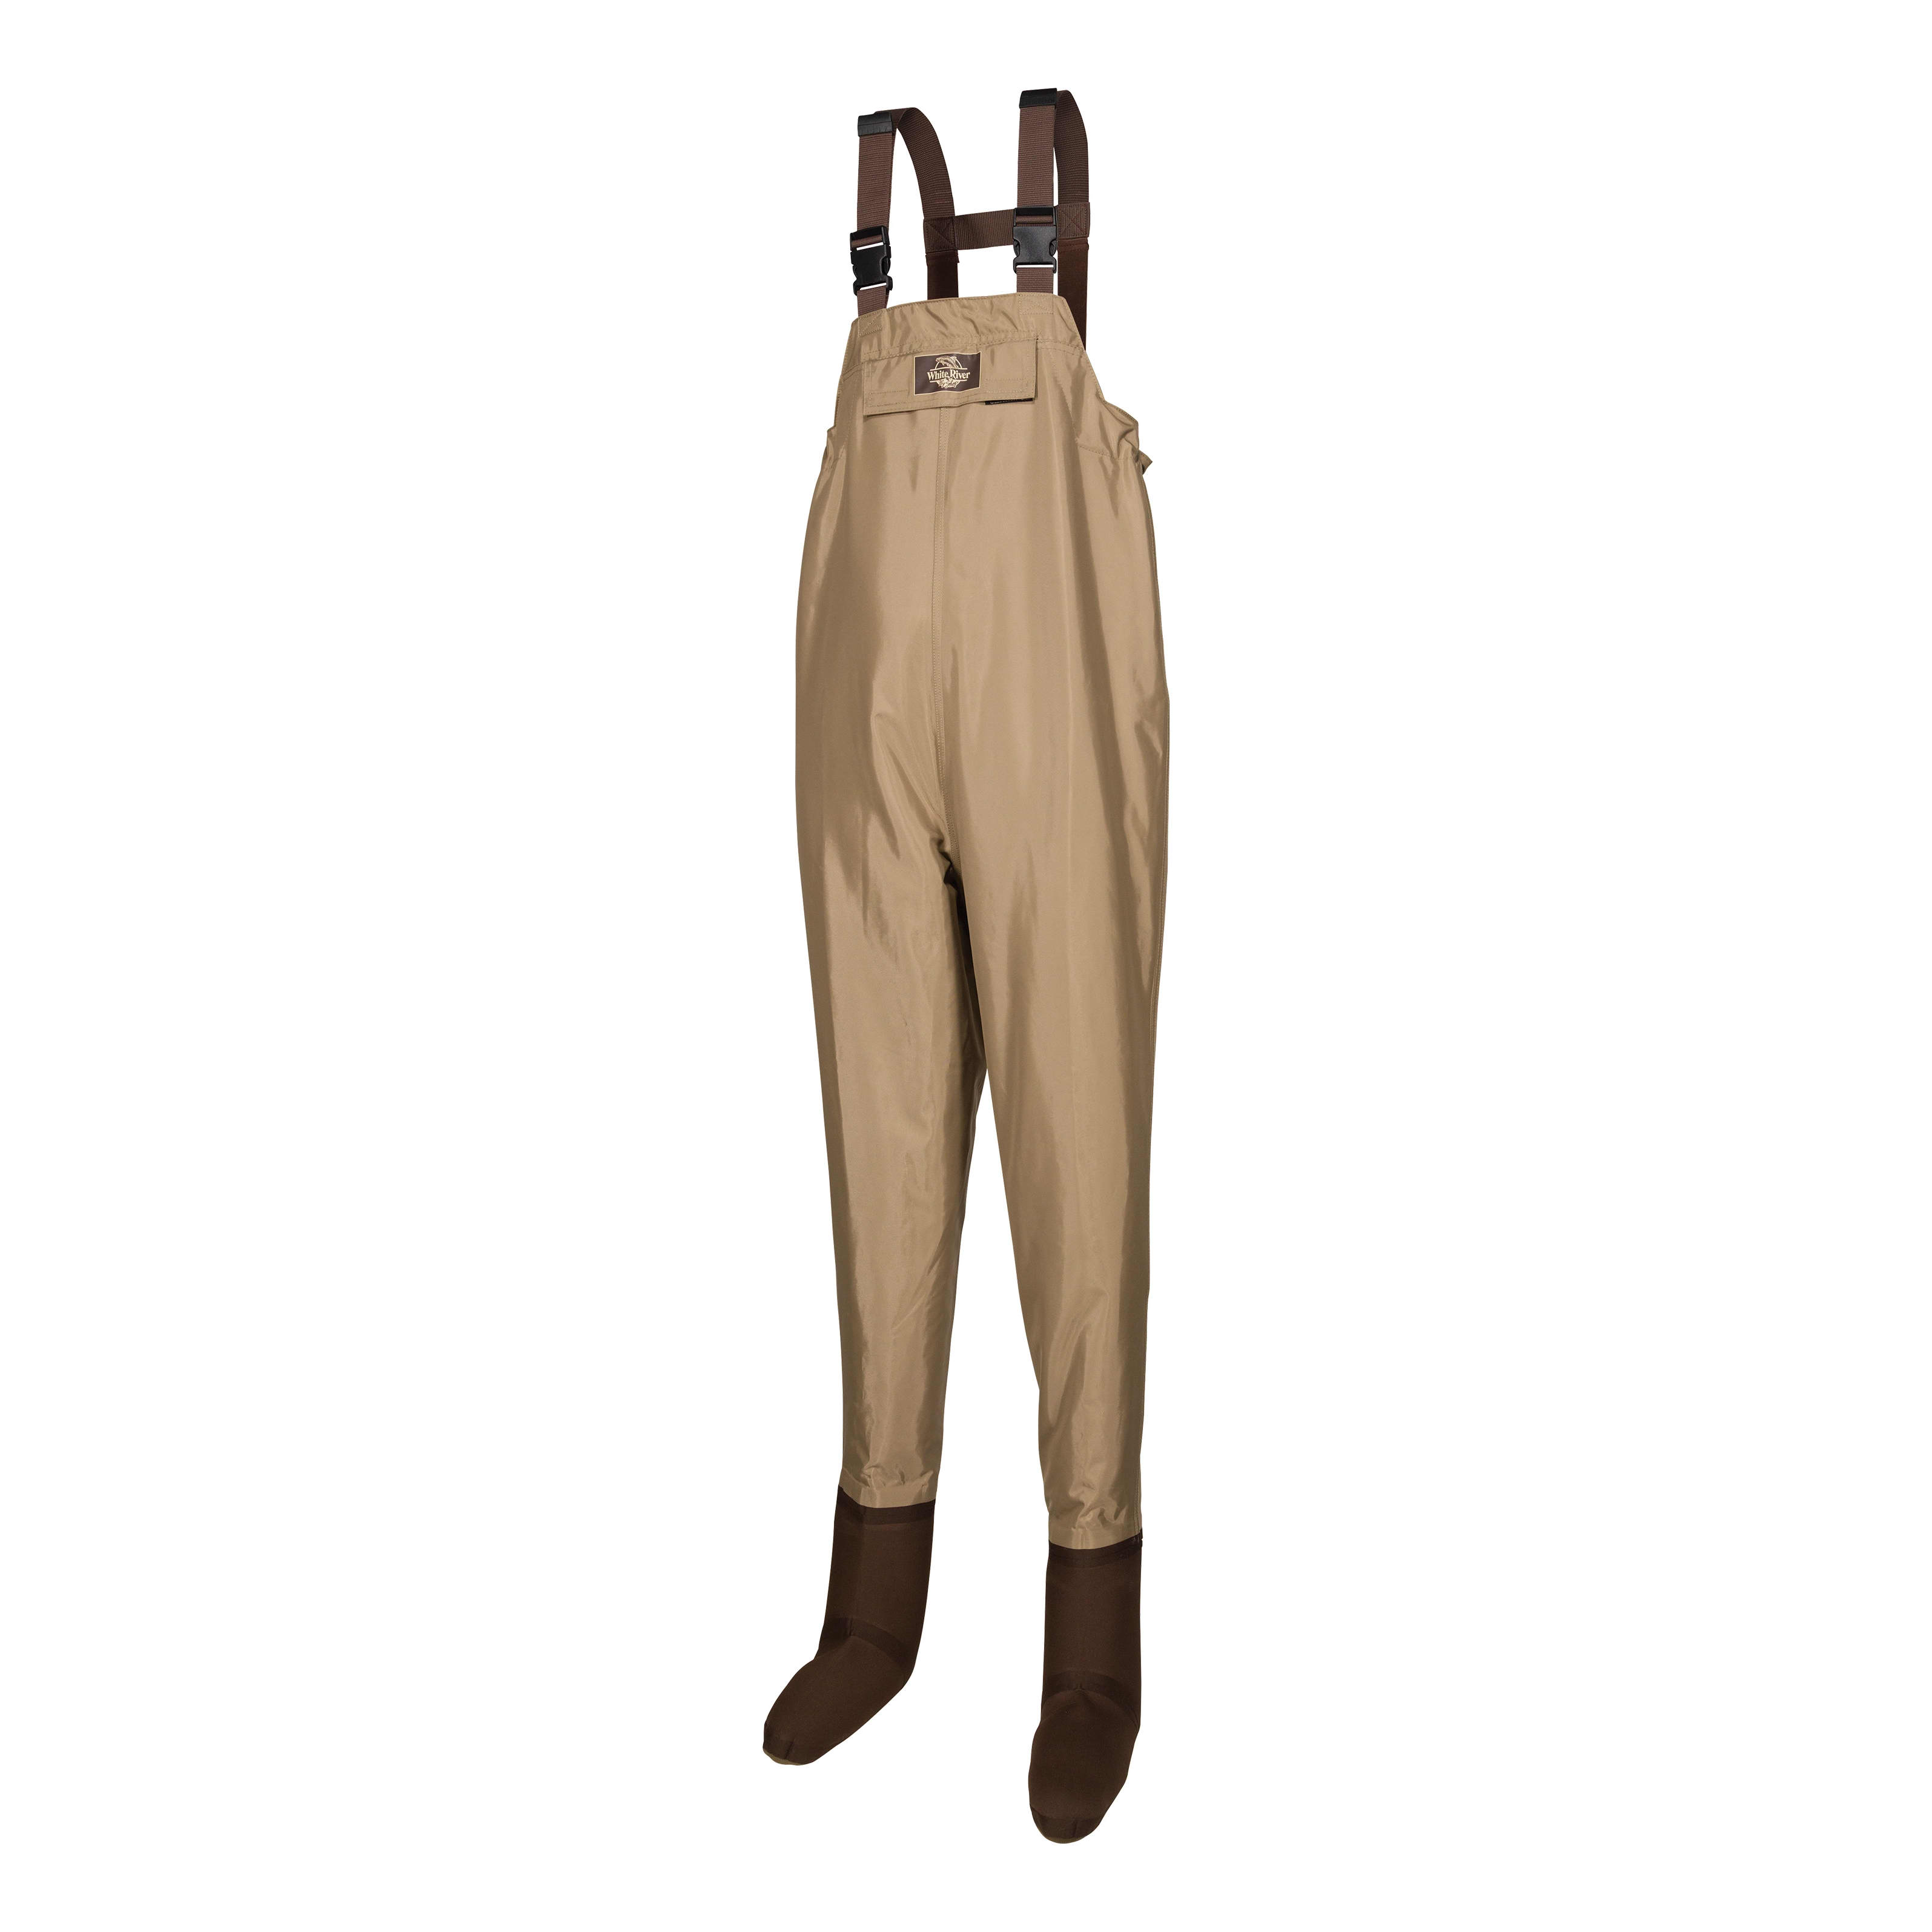 White River Fly Shop® Men's Three Forks Lug-Sole Hip Waders